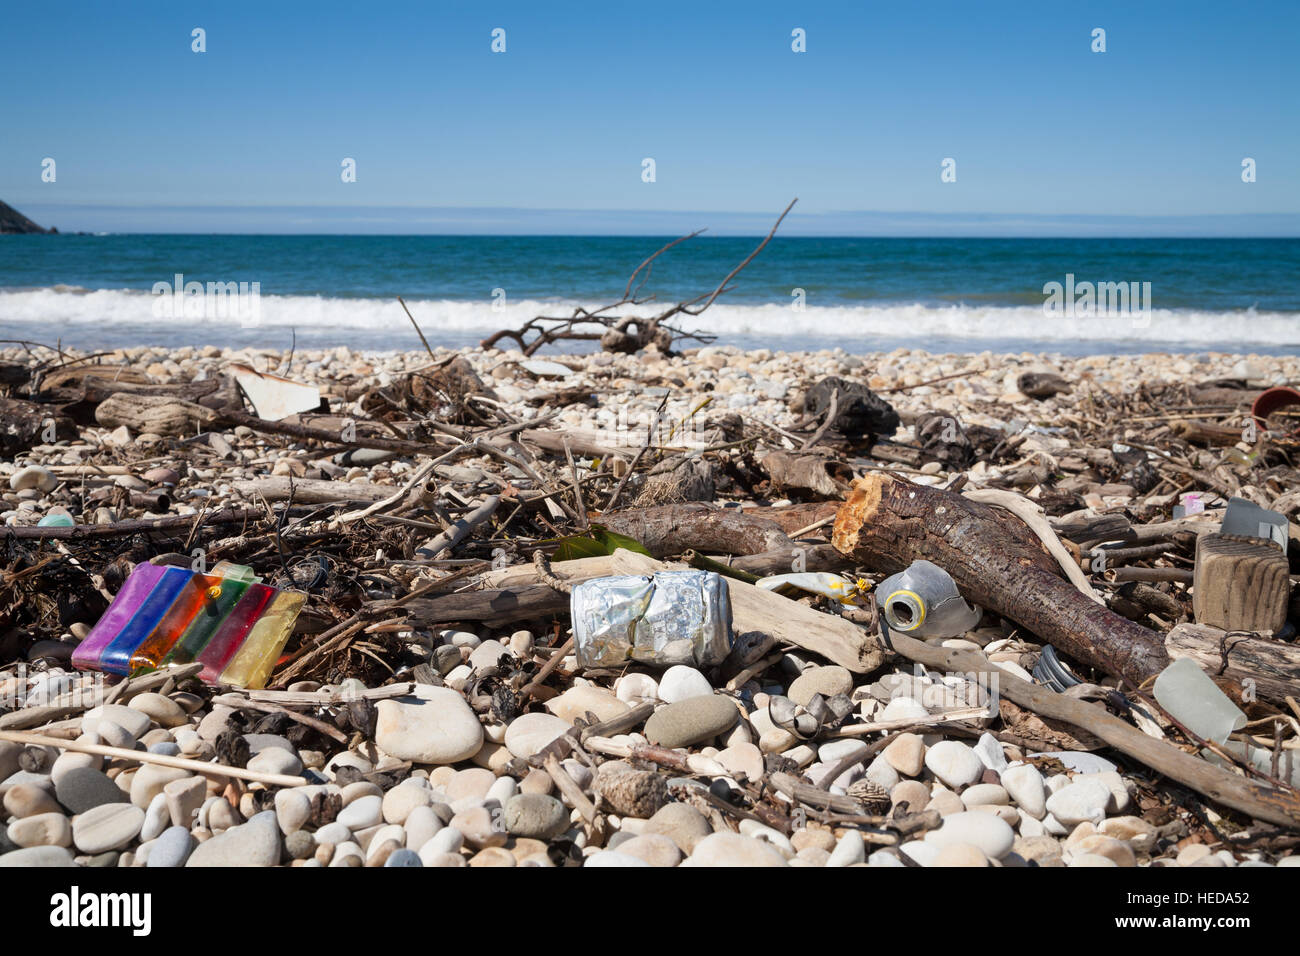 https://c8.alamy.com/comp/HEDA52/tree-branches-metal-can-plastic-bag-and-bottle-and-waste-on-seashore-HEDA52.jpg